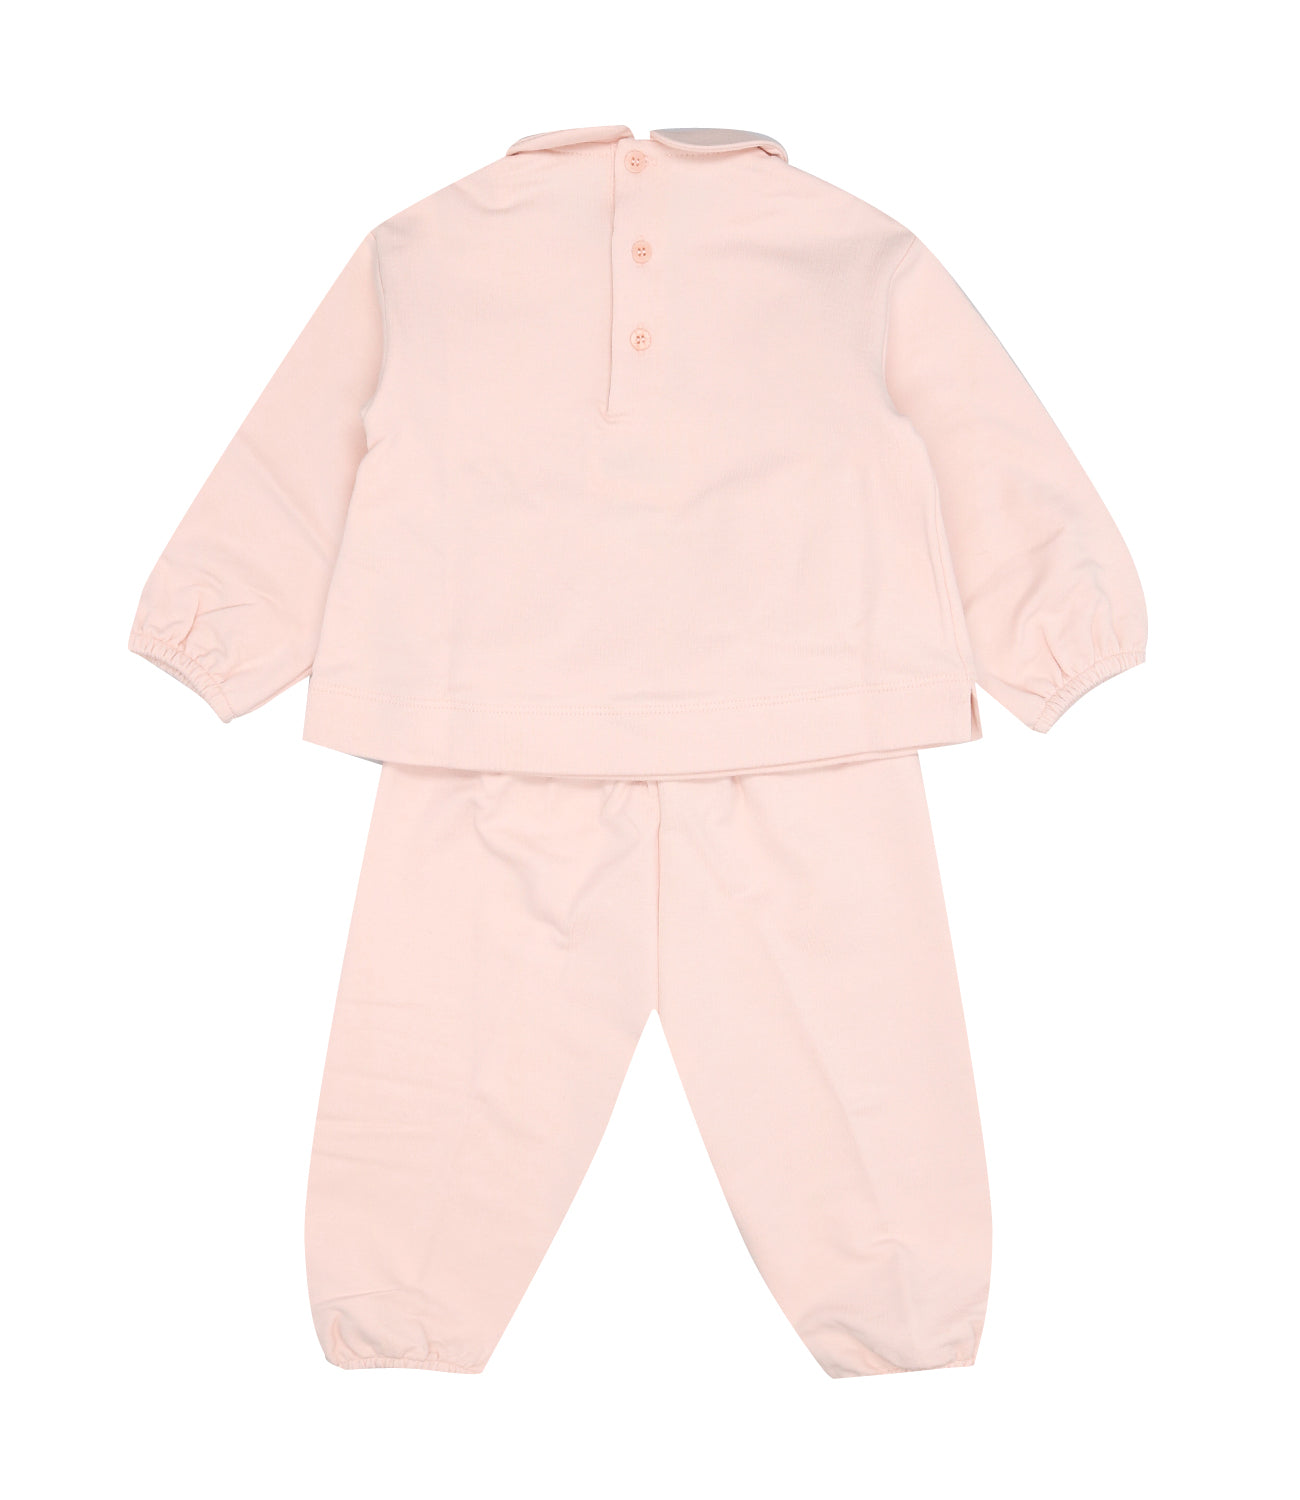 The Owl | Pink Sweater and Pant Set